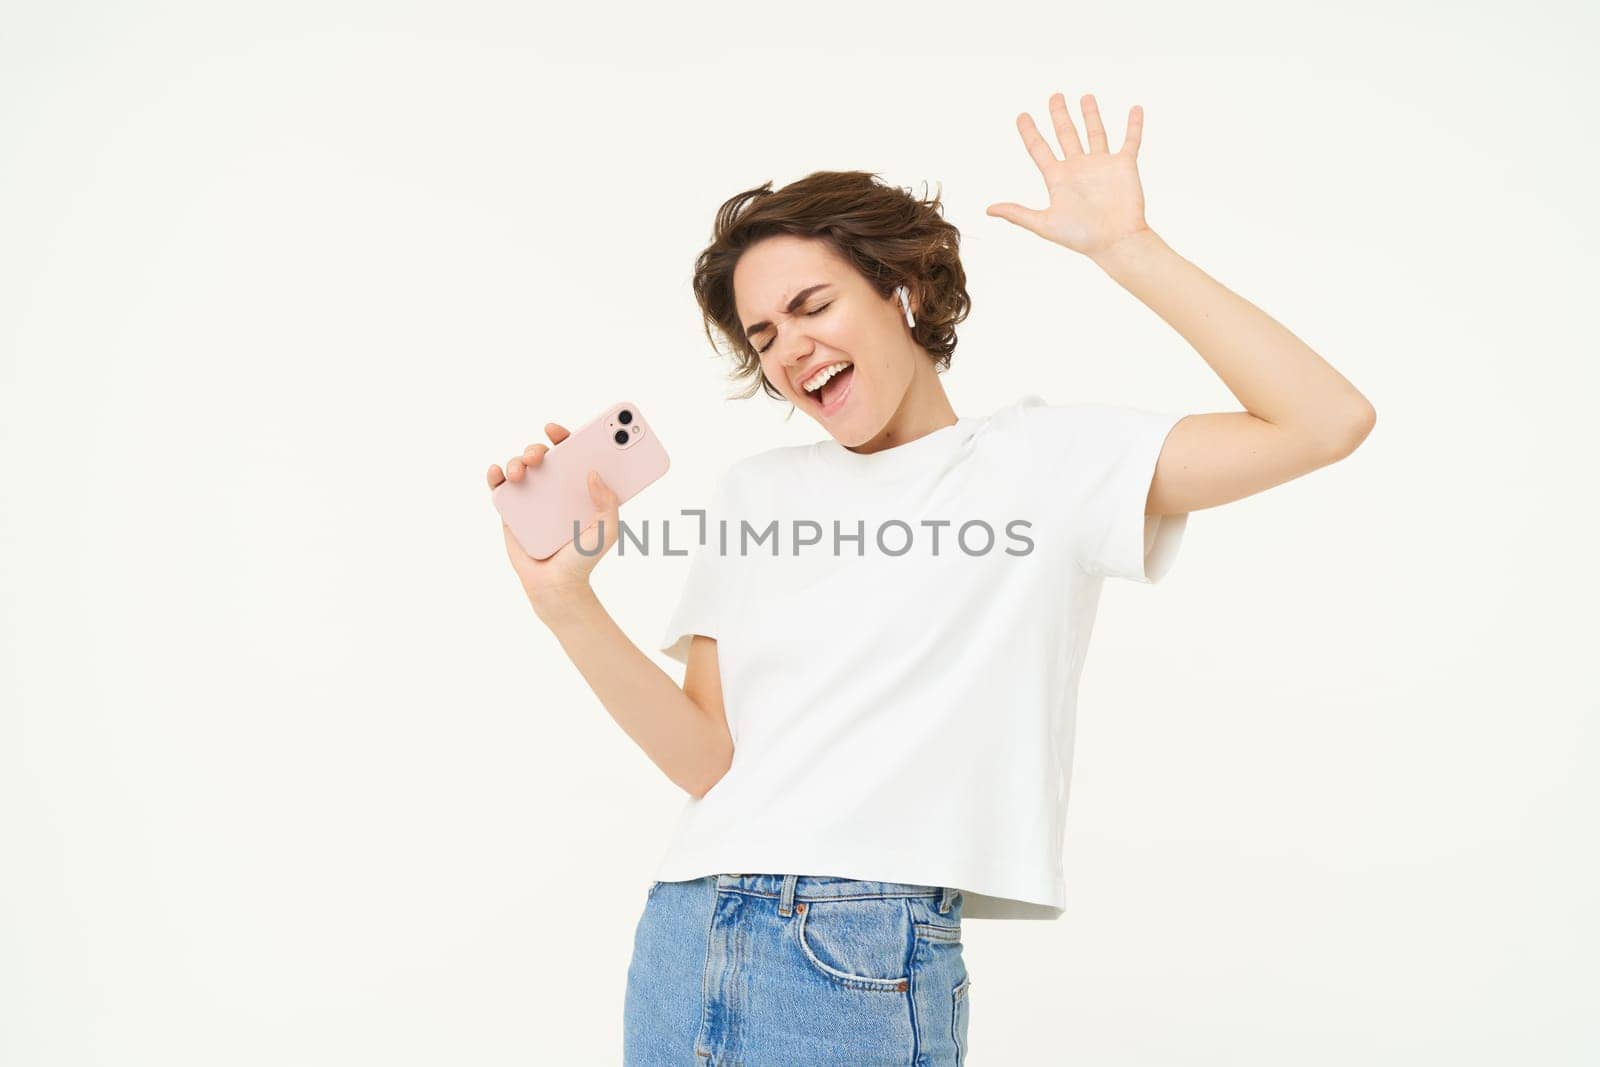 Portrait of carefree girl singing in wireless headphones into smartphone microphone, playing music game on mobile app, standing over white background.